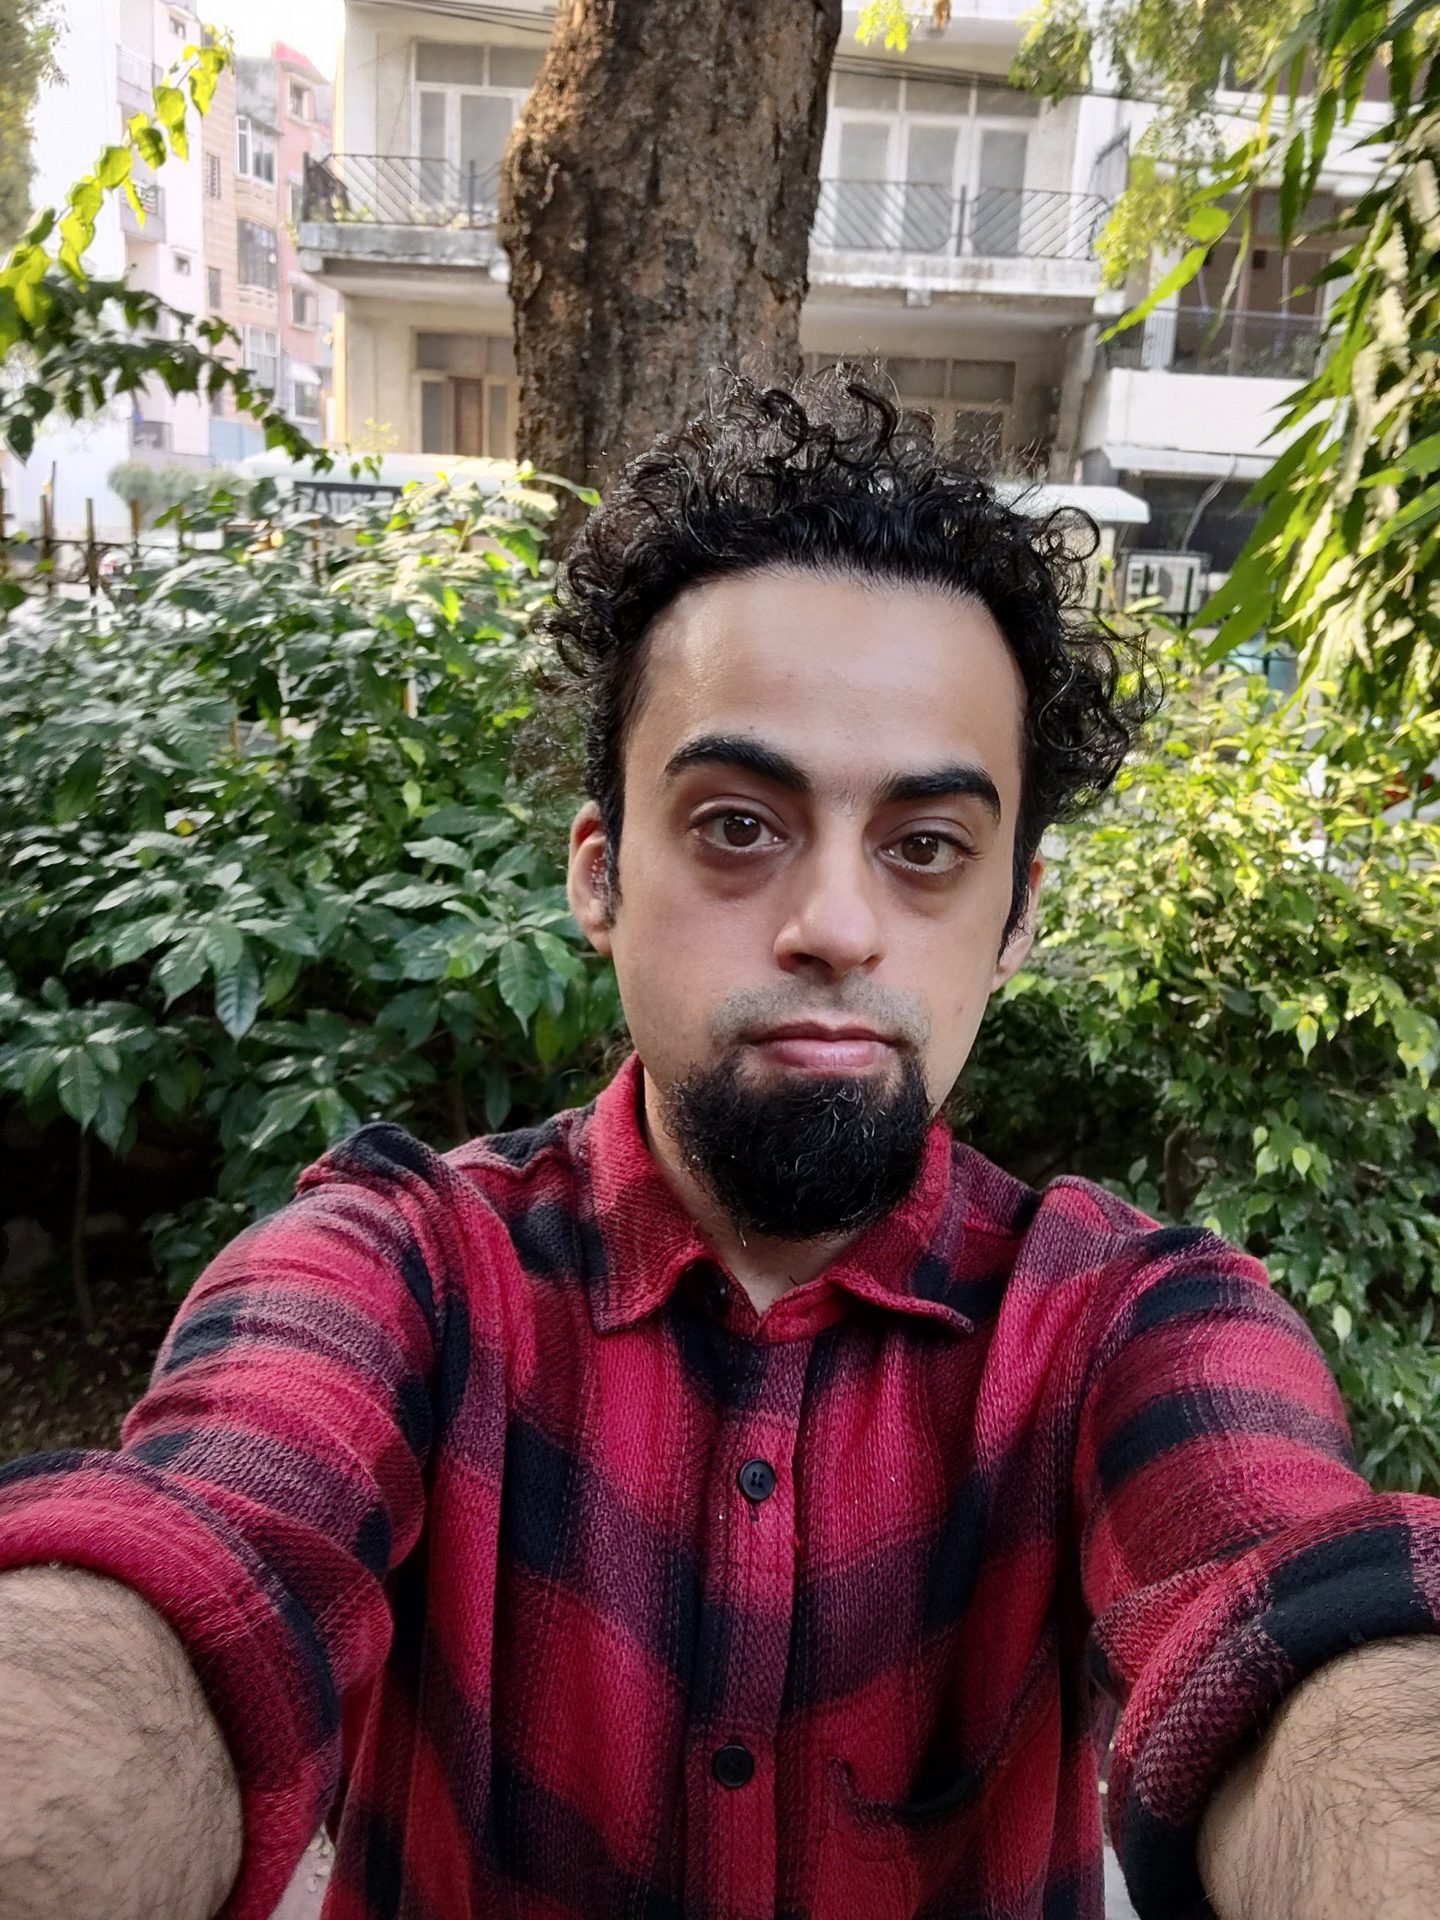 Moto Edge 20 pro selfie camera of a man with dark curly hair and a beard, wearing a red and black checked shirt and standing in front of green bushes.